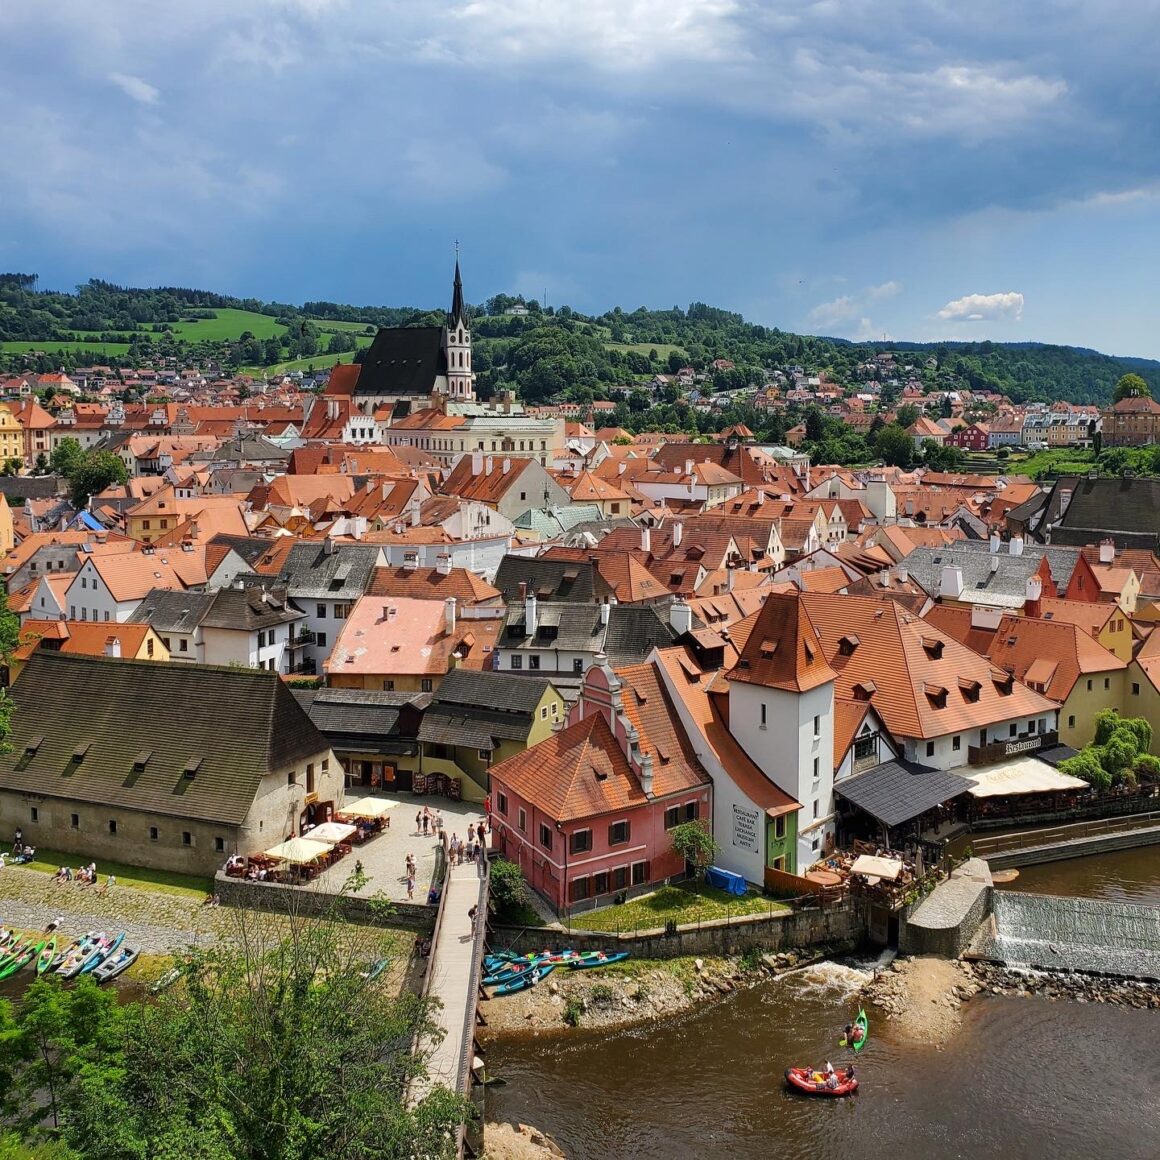 The view from State Castle Cesky Krumlov, considered one of the most beautiful castles in Czech Republic